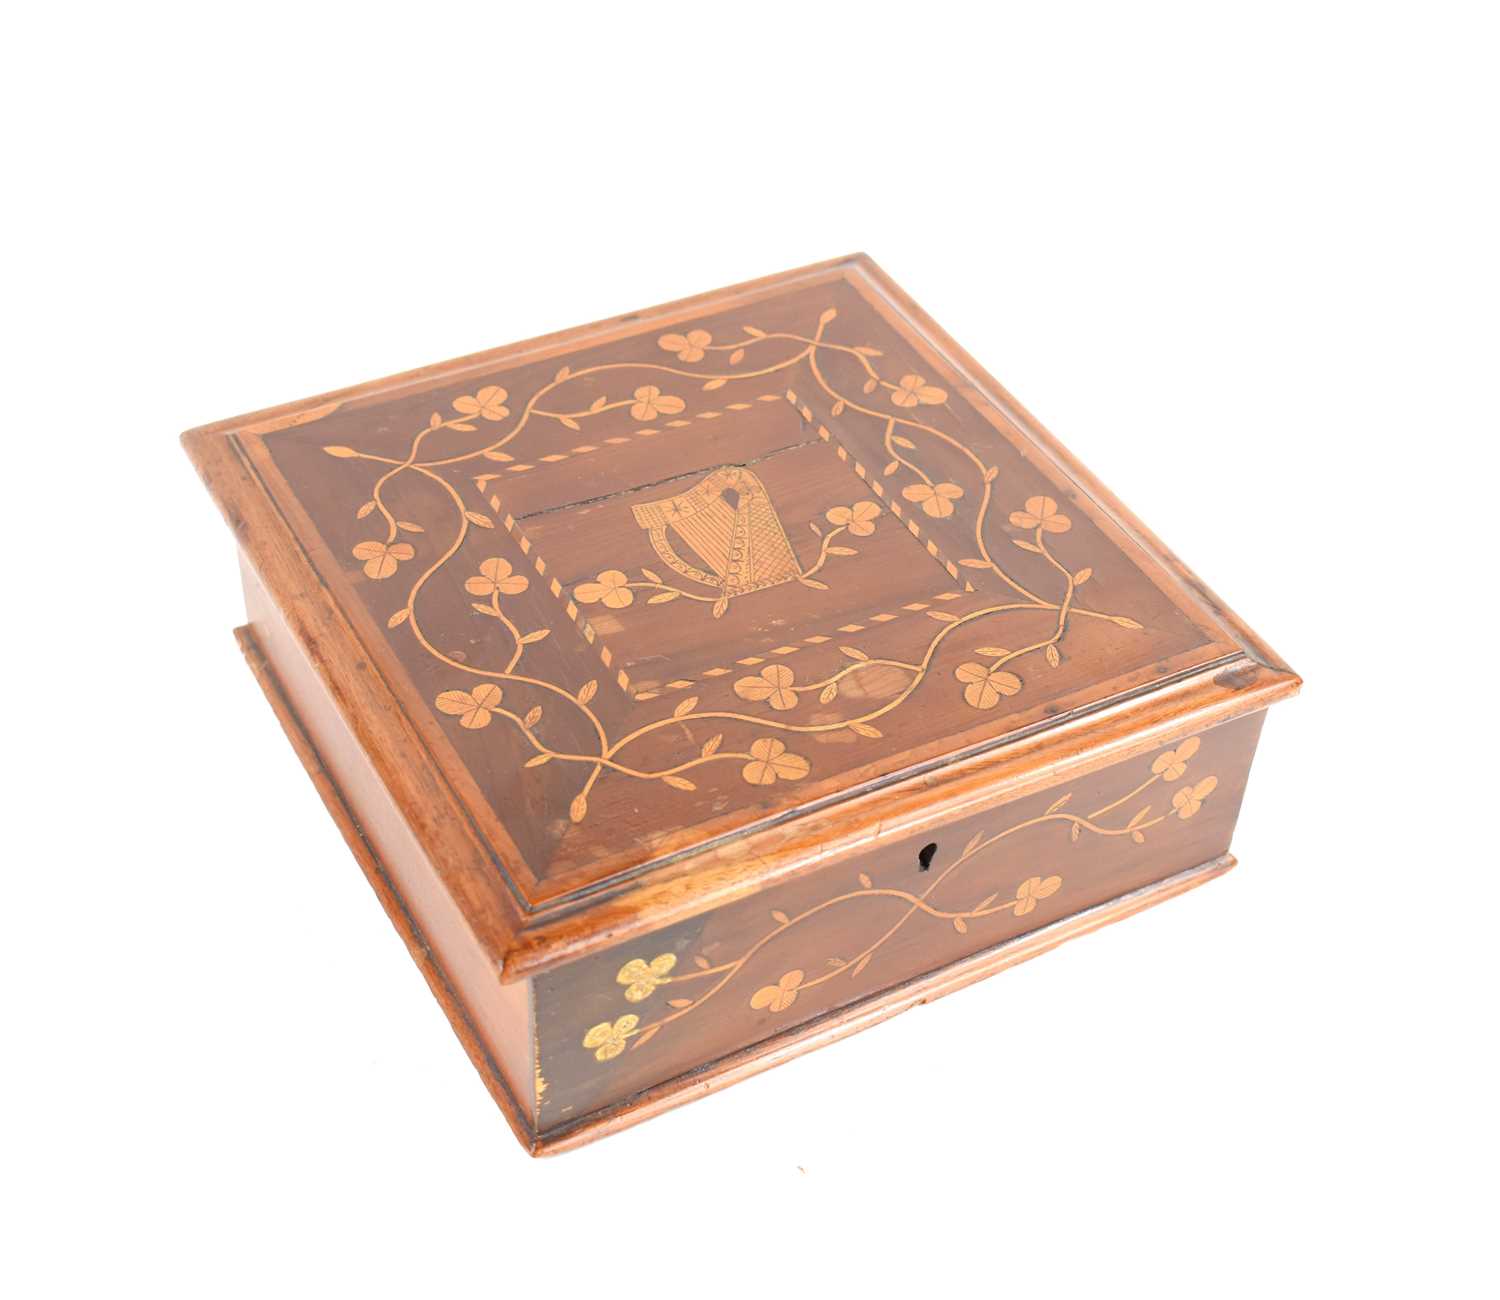 A 19th century marquetry inlaid box, the lid depicting a harp surrounded by floral sprays, 22cm by - Image 2 of 3